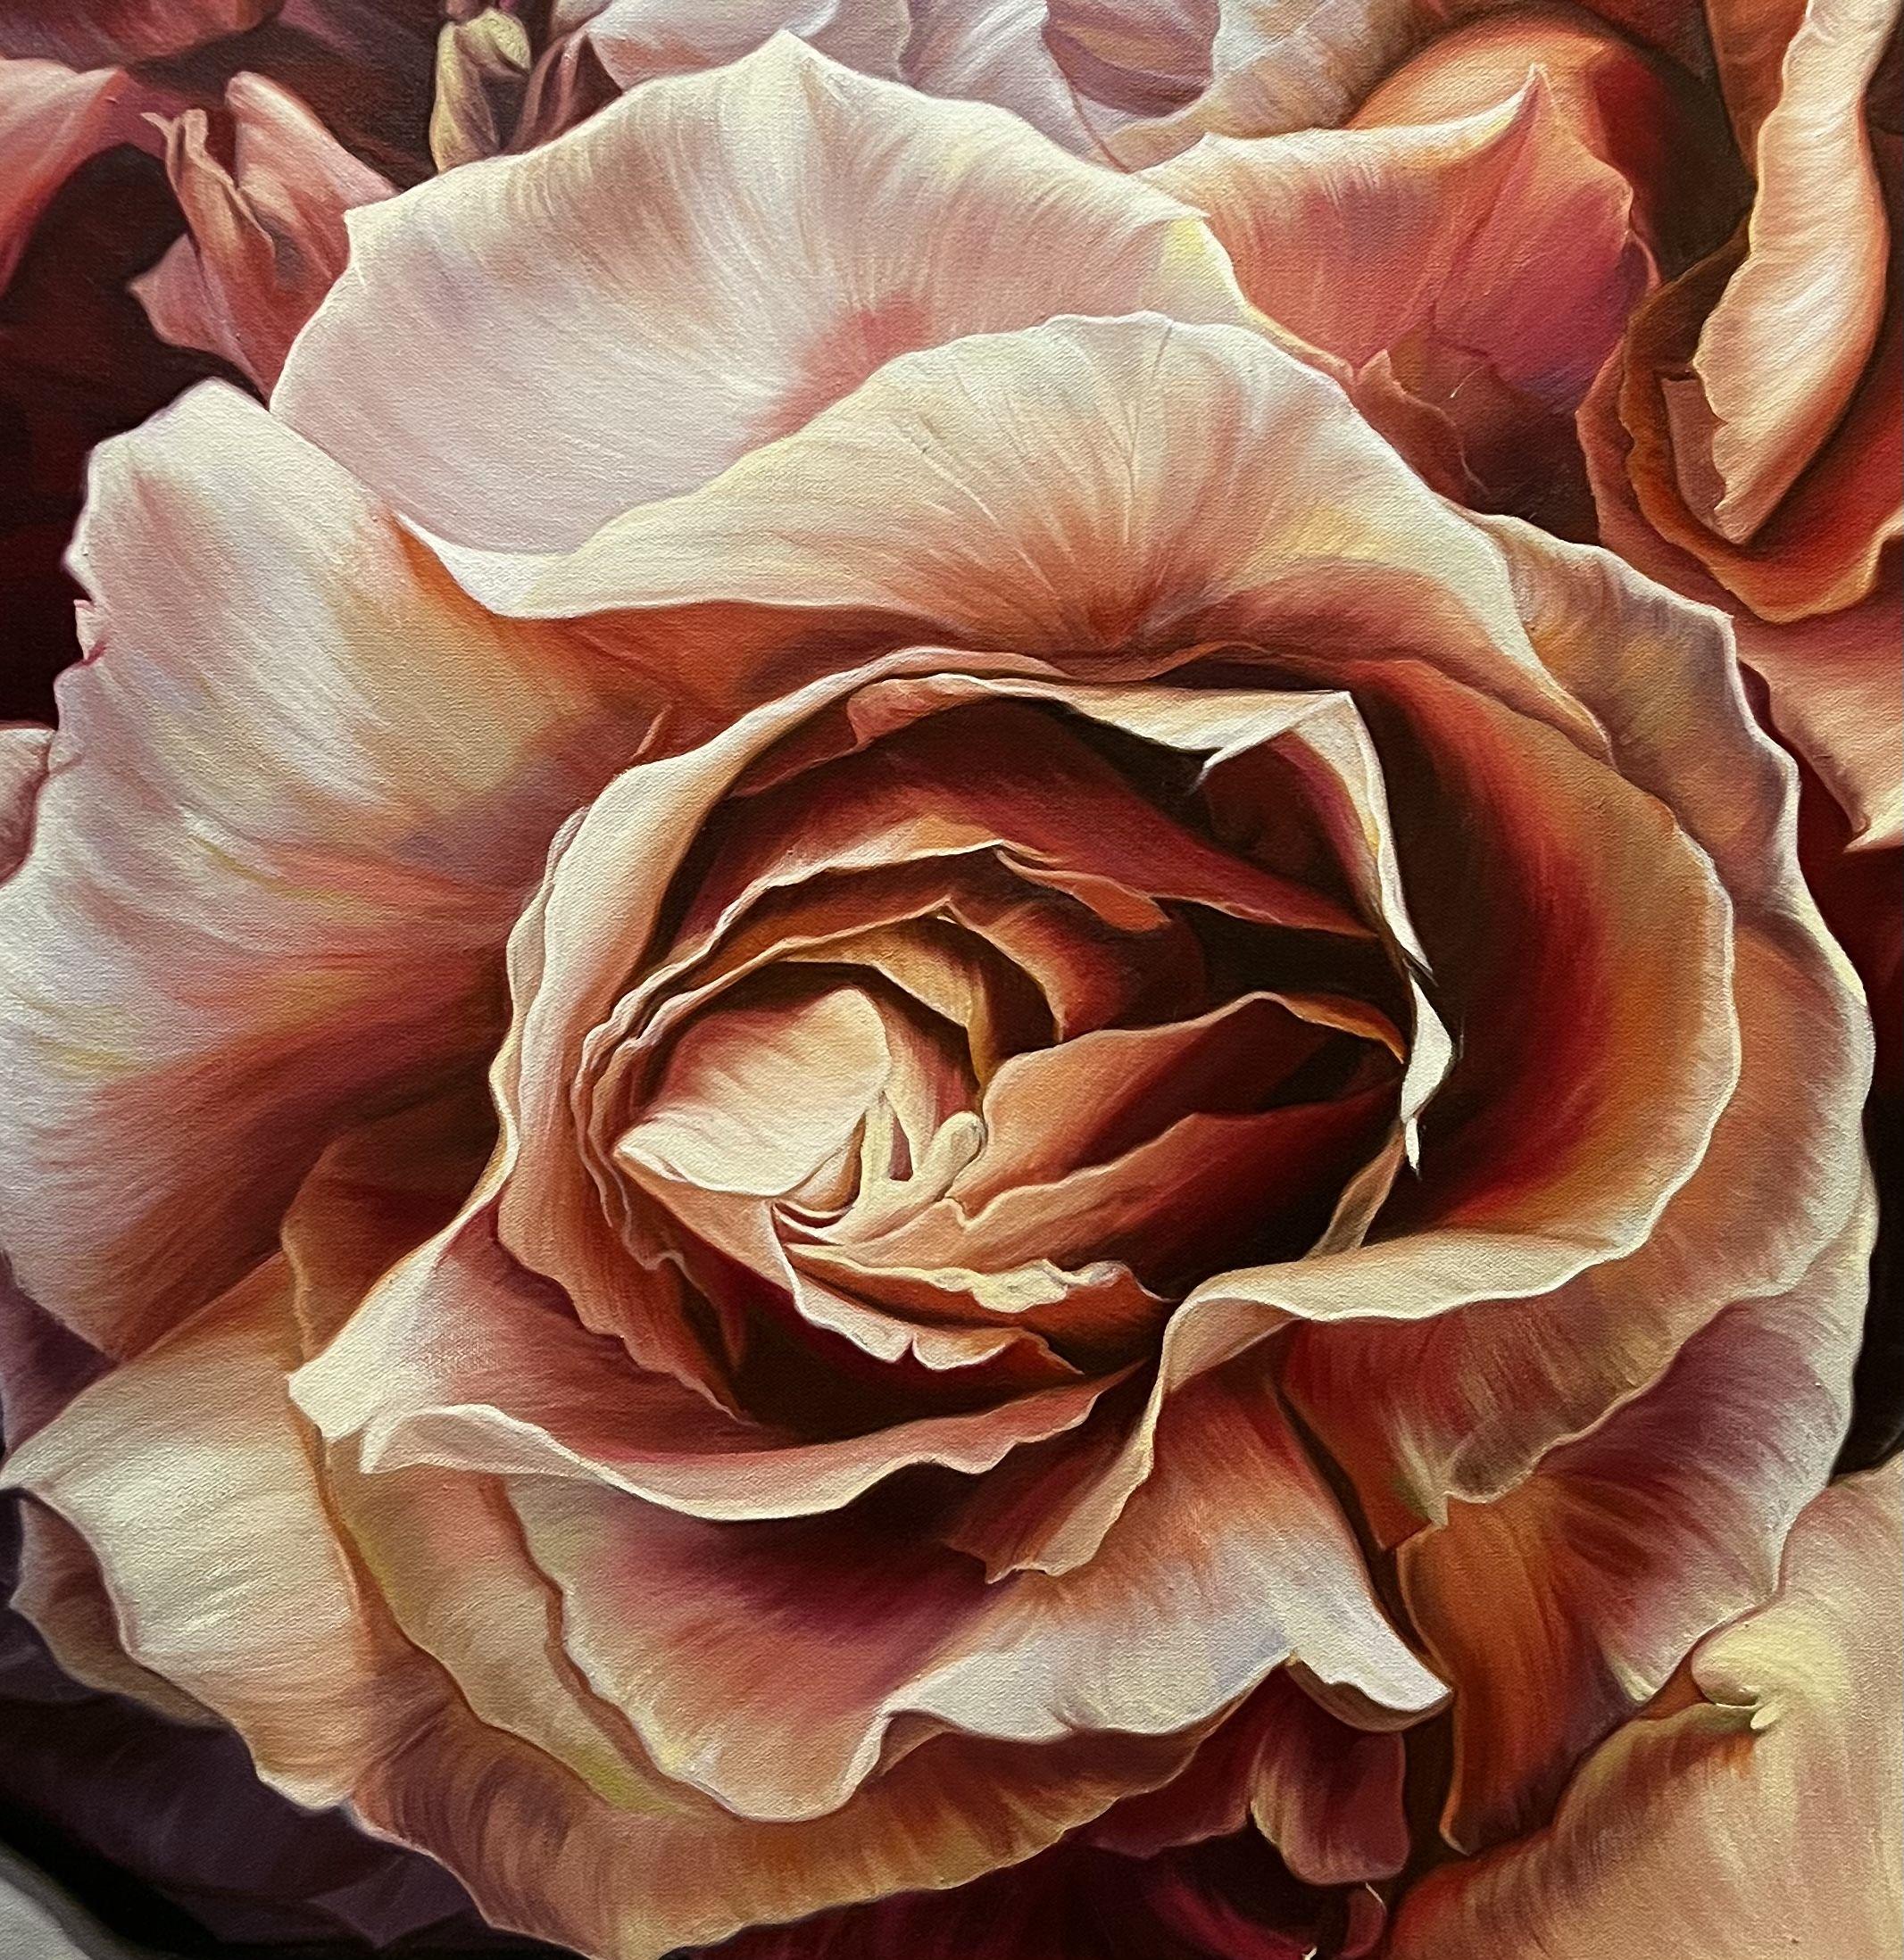 Brown roses. Year of creation the  end of 2020, December :: Painting :: Fine Art :: This piece comes with an official certificate of authenticity signed by the artist :: Ready to Hang: Yes :: Signed: Yes :: Signature Location: Podmarkova  :: Canvas